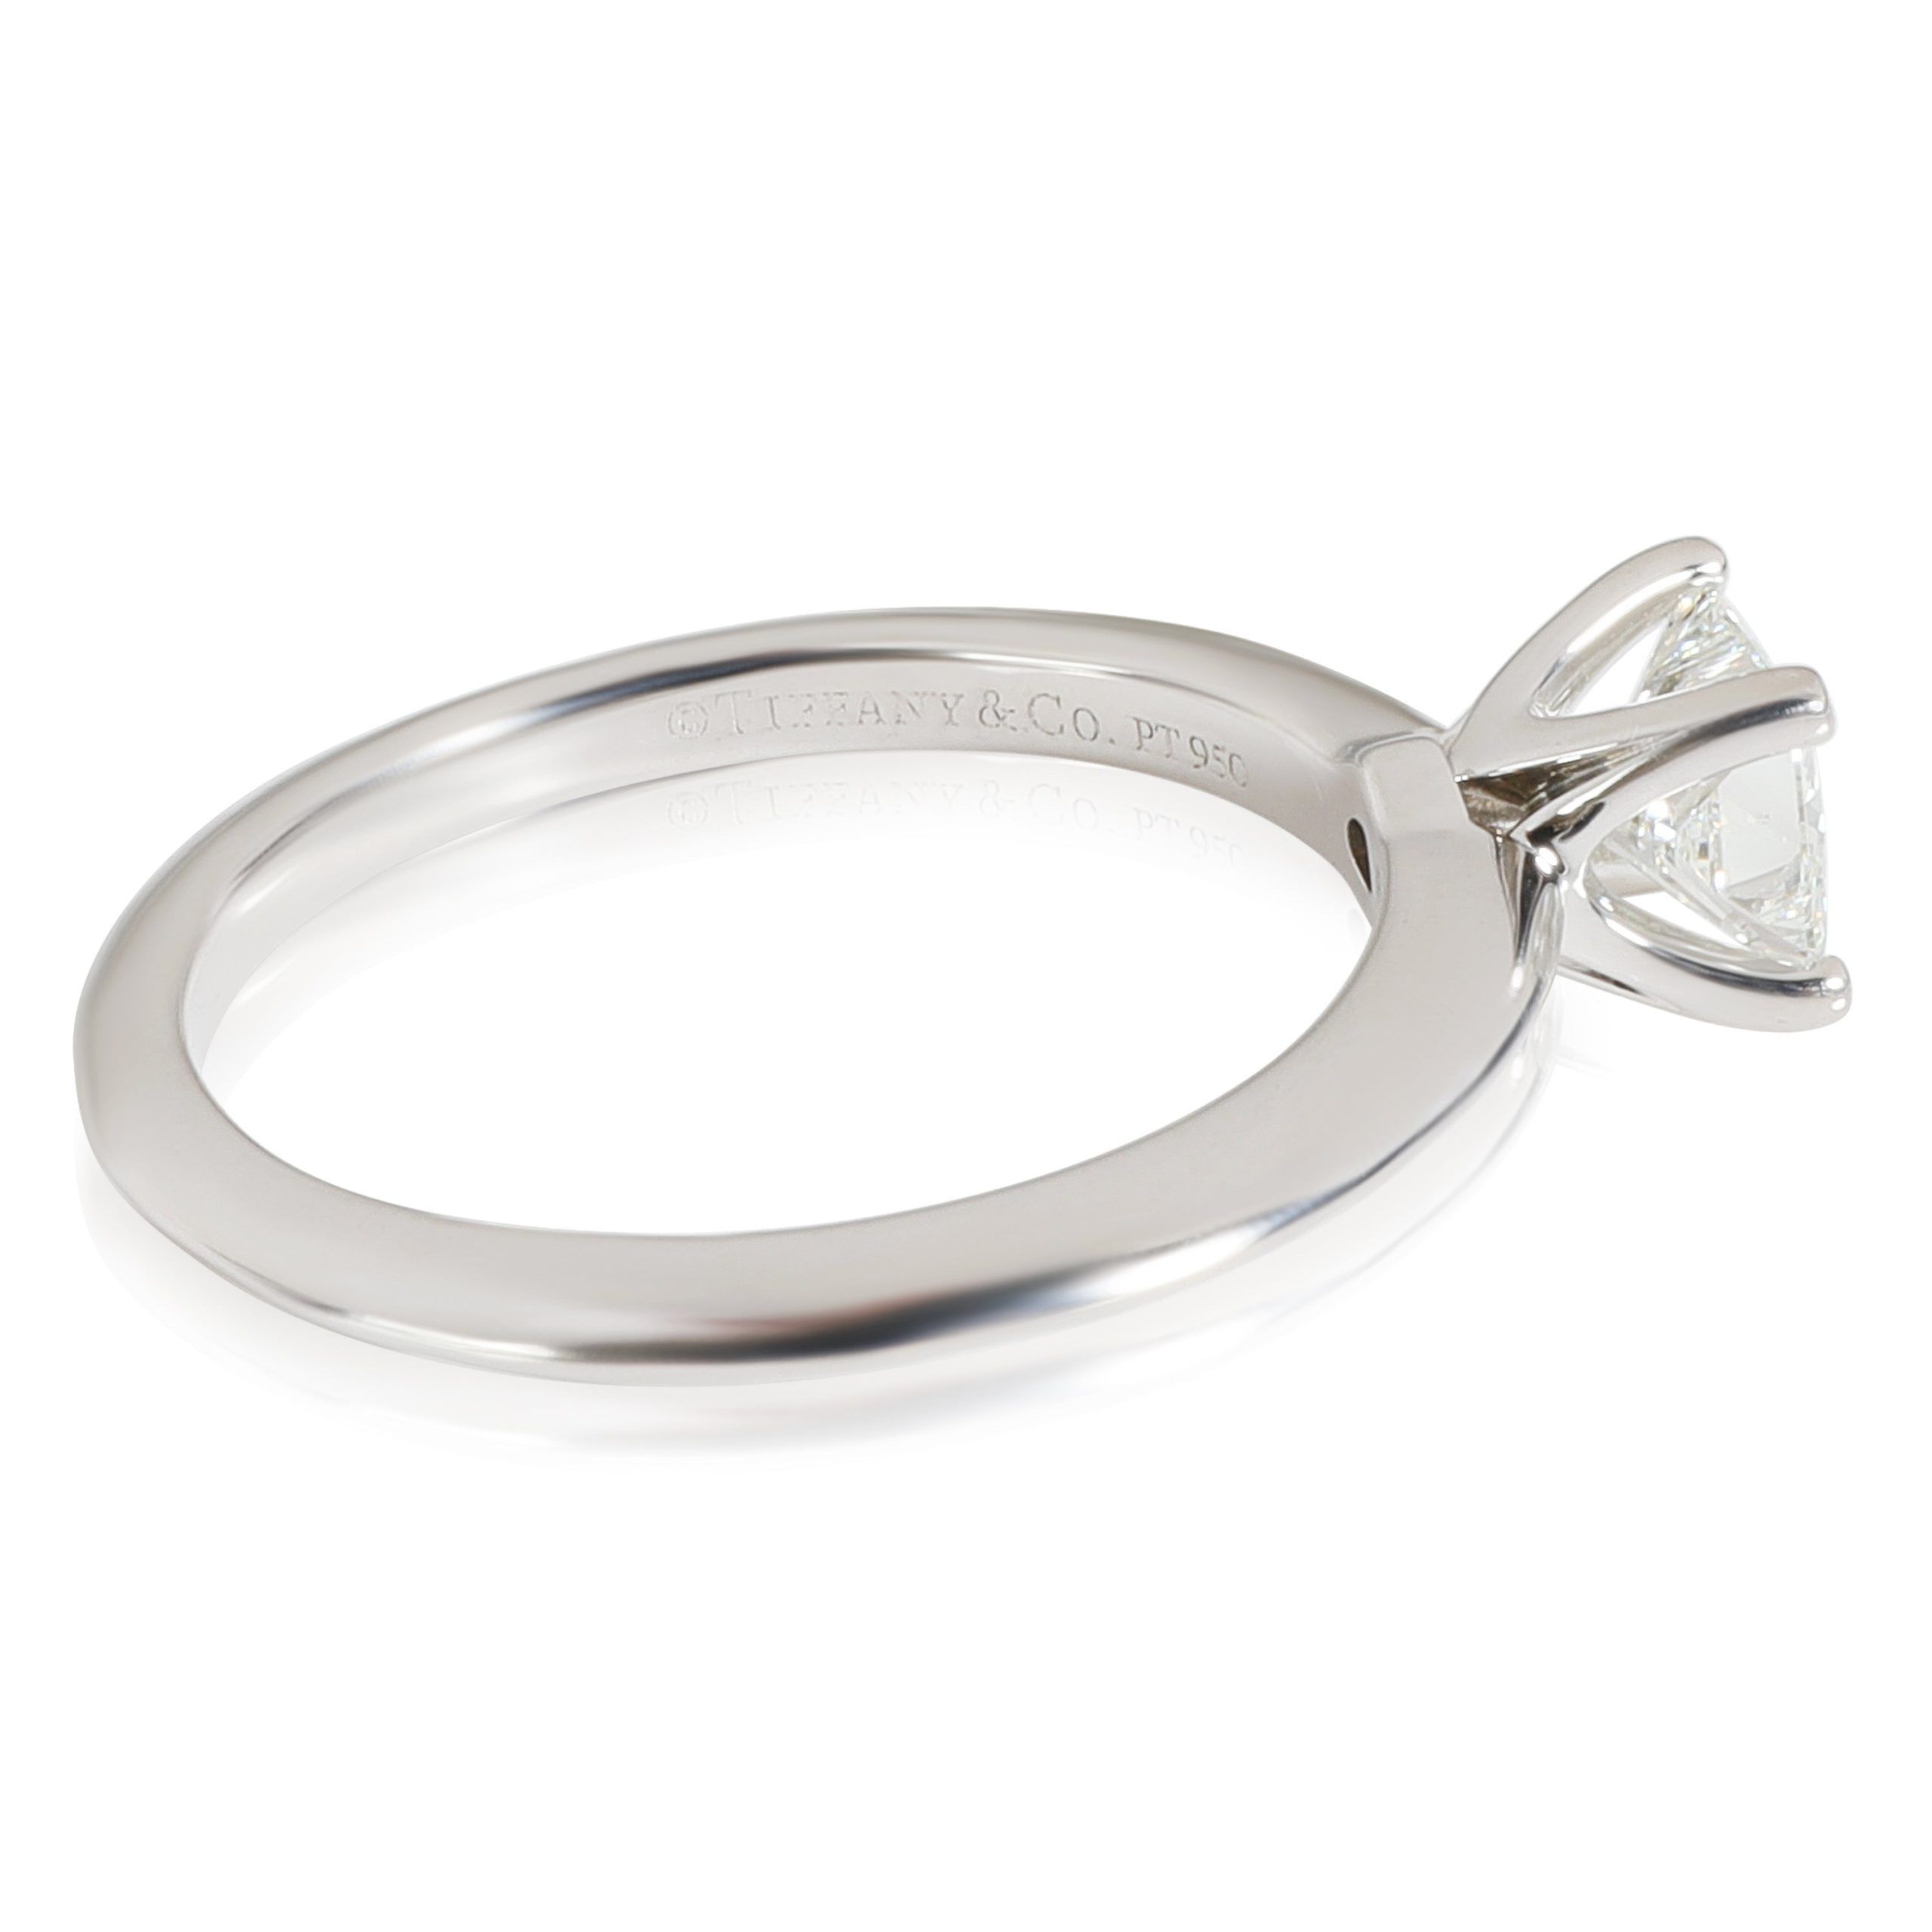 Tiffany & Co. Tiffany & Co. Diamond Engagement Ring in Platinum I VS2 0.40 CTW Size ONE SIZE - 2 Preview